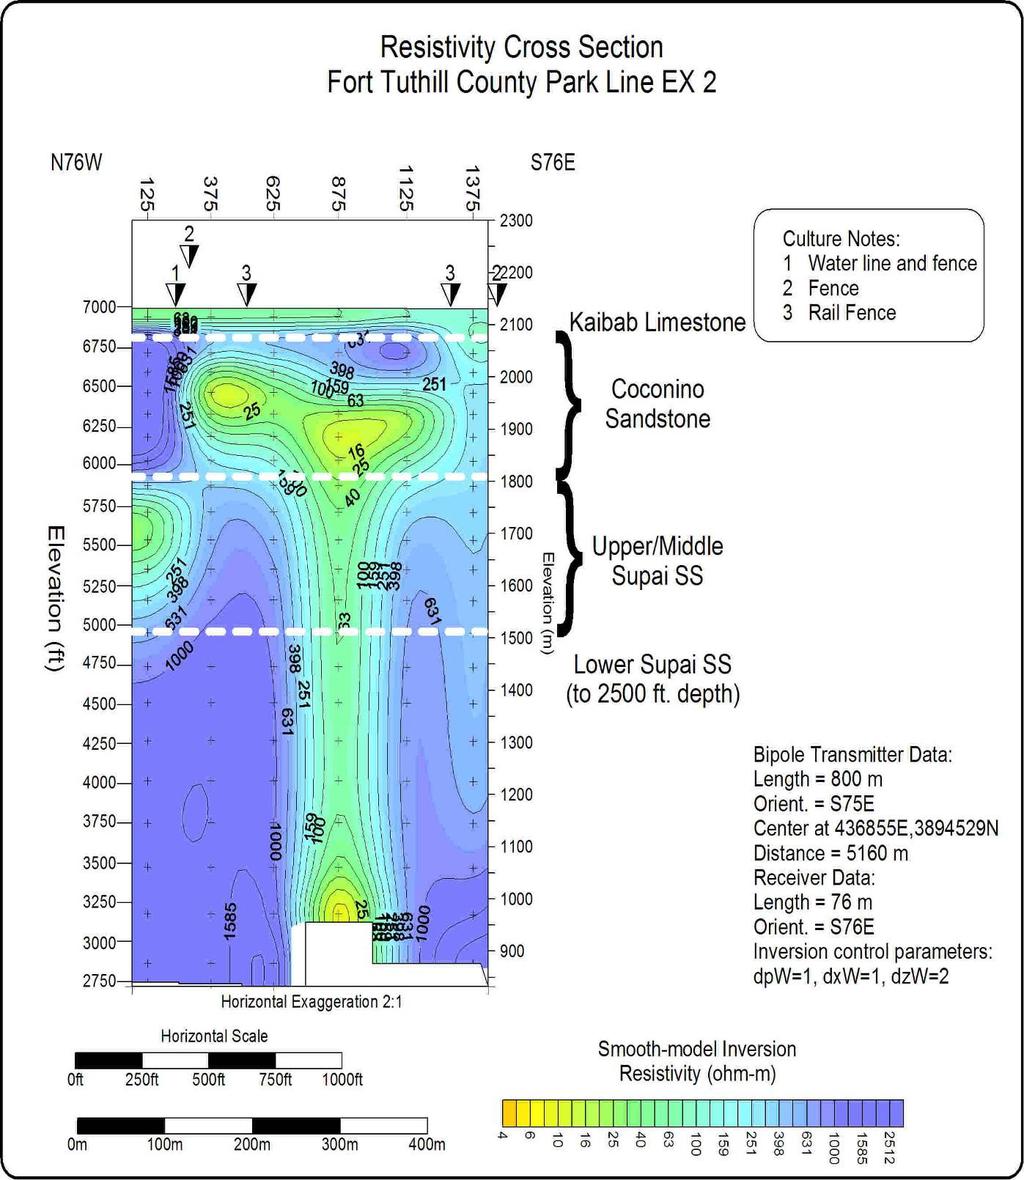 FIGURE 2: Resistivity cross section from the 1D smooth-model inversion of the CSAMT data for Line EX-2,